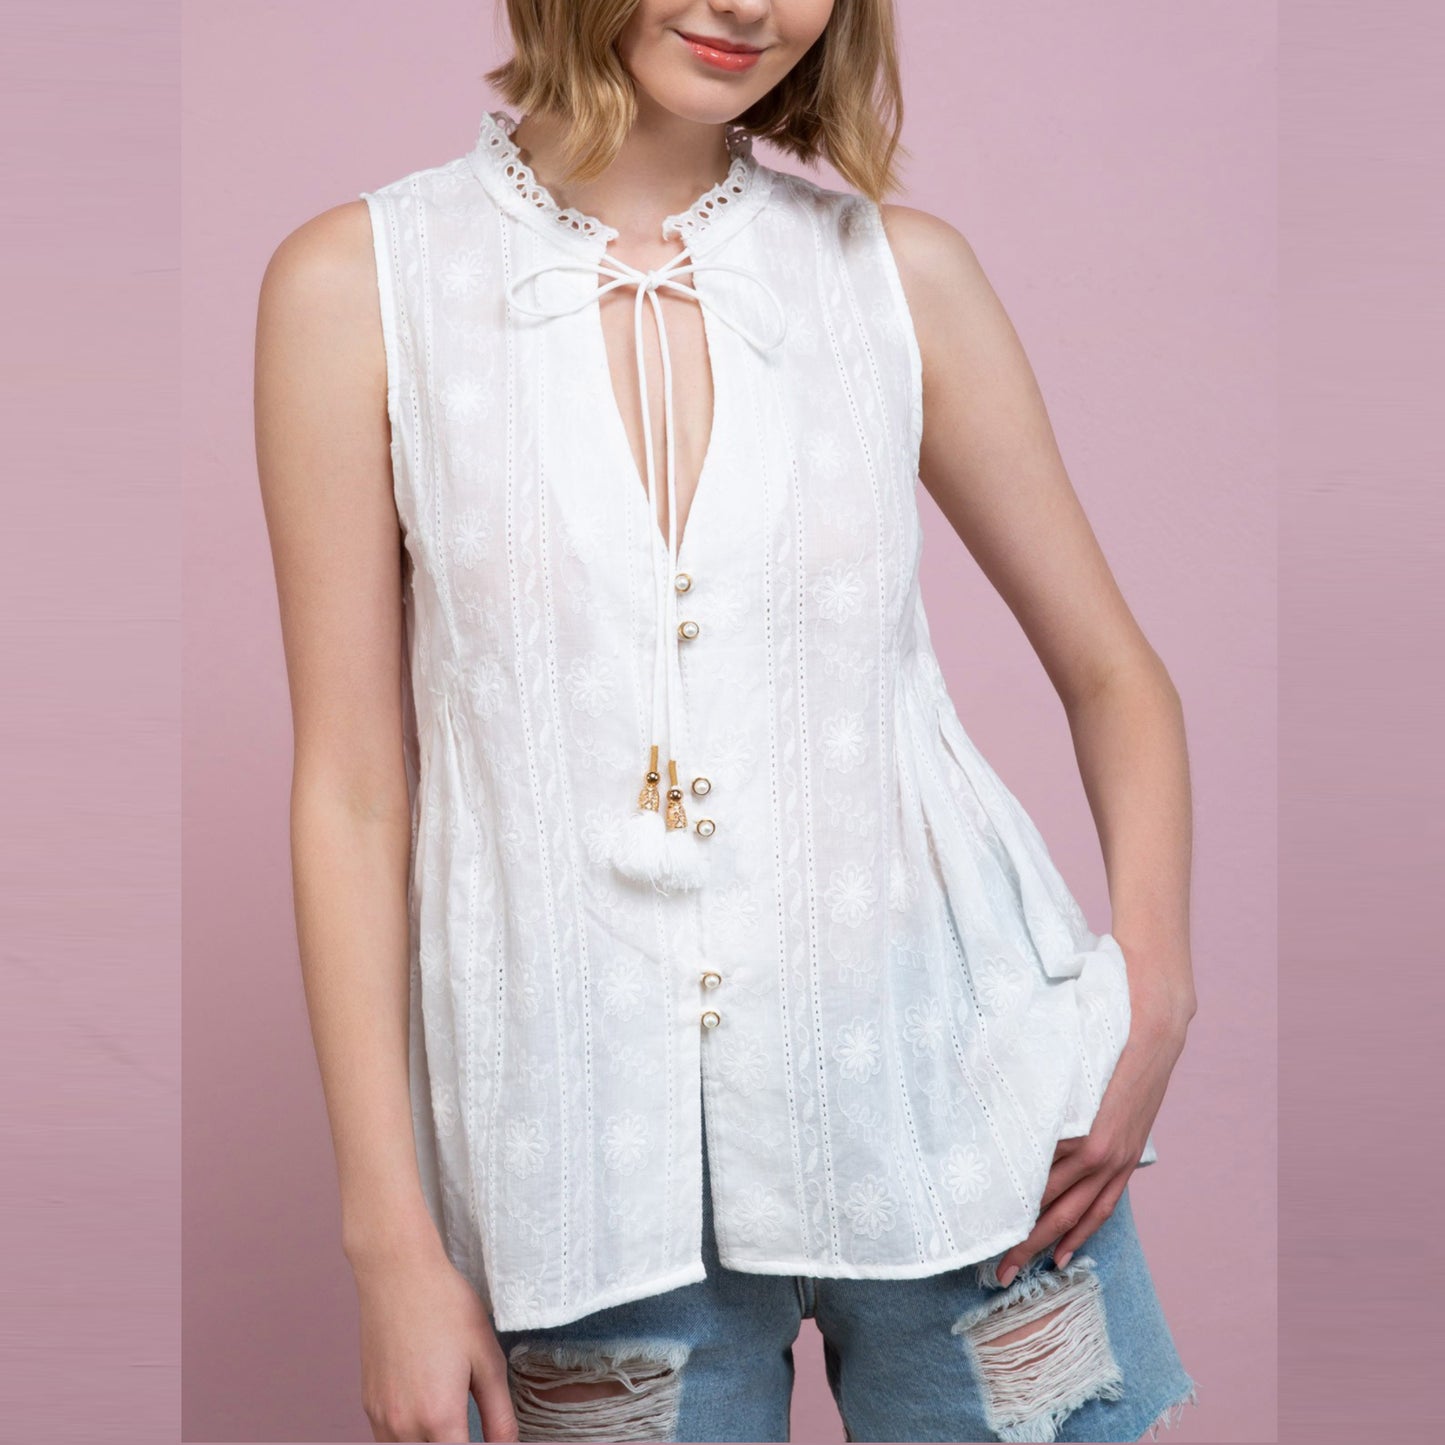 POL Femme Embroidered Eyelet Trim V-neck with Tassel Ties Blouse Tunic